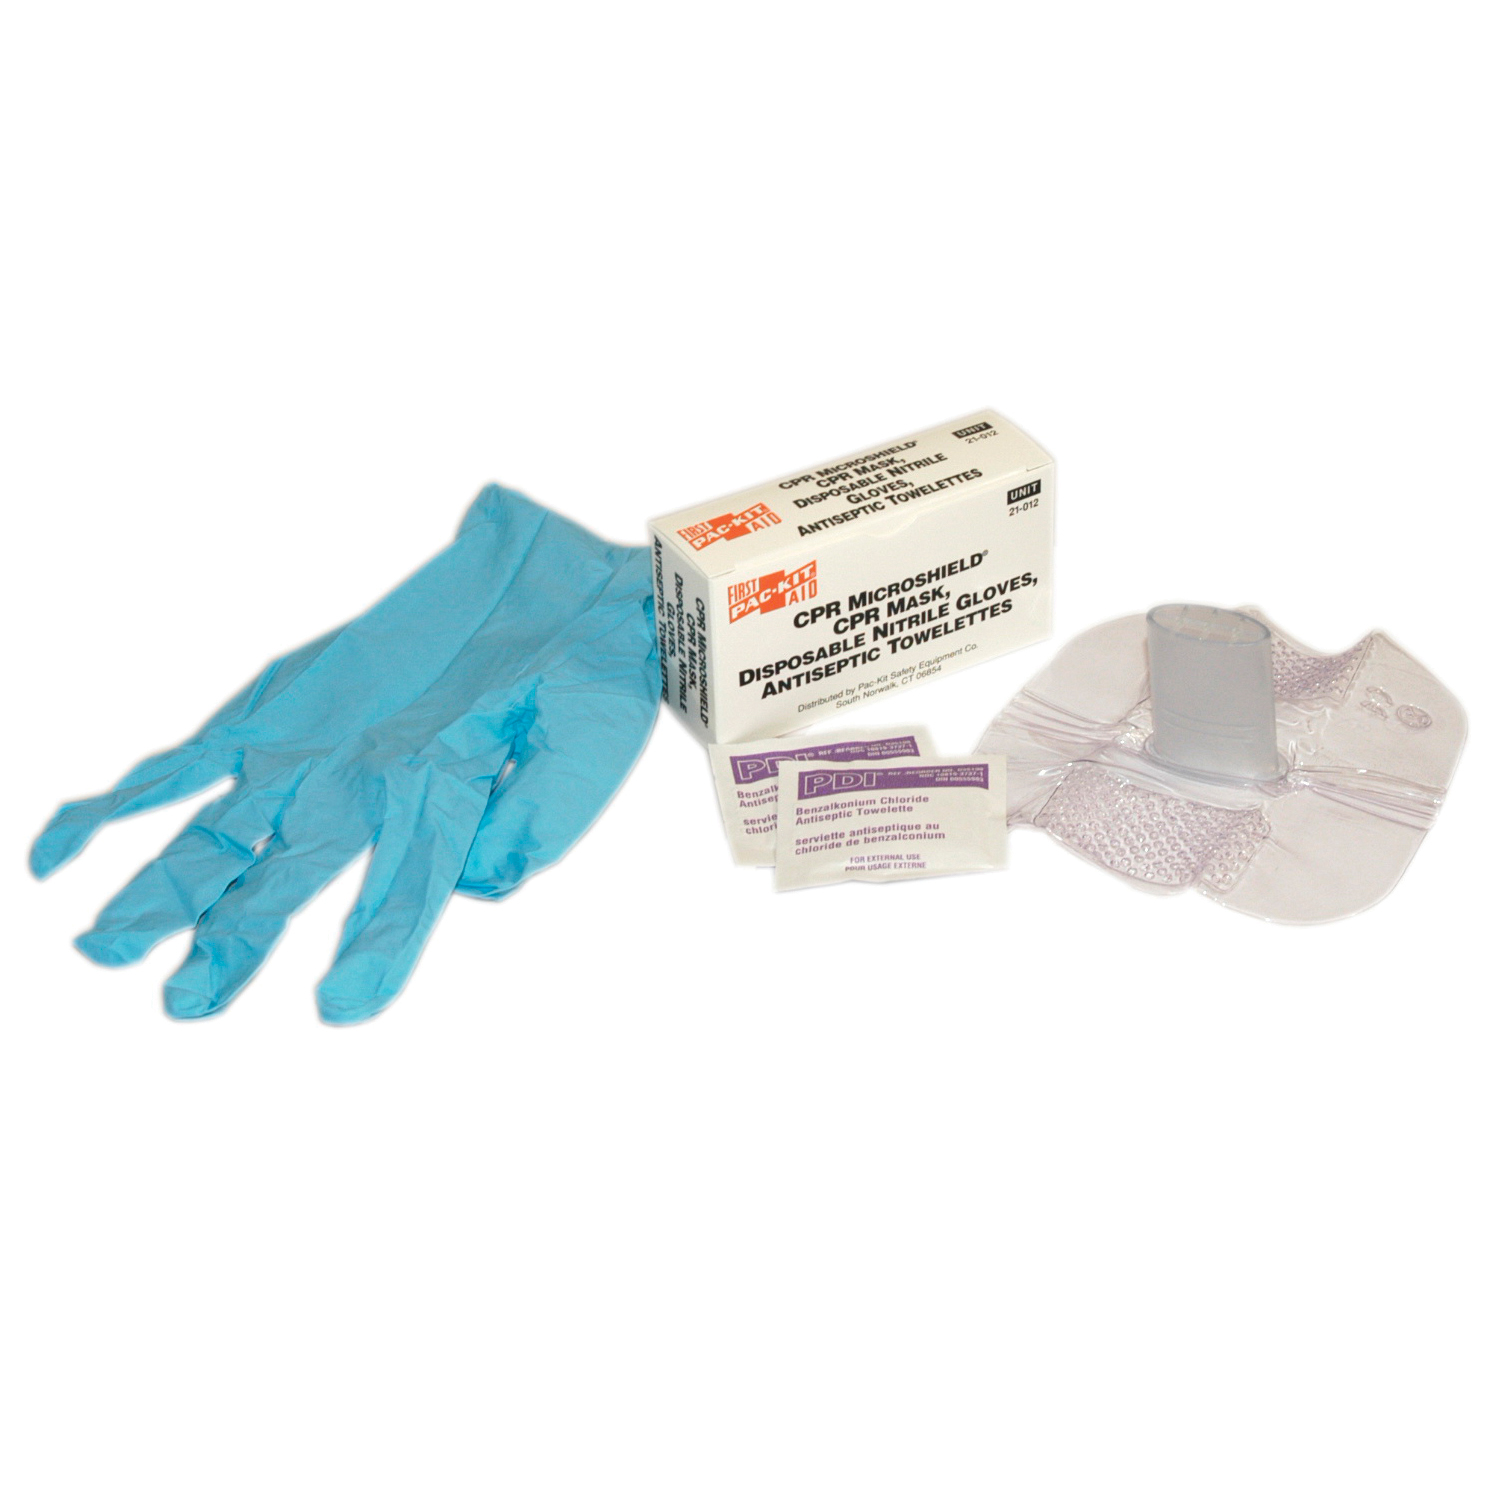 CPR MICROSHIELD, GLOVES AND ANTISPETIC WIPES KIT (FAO-21-012)